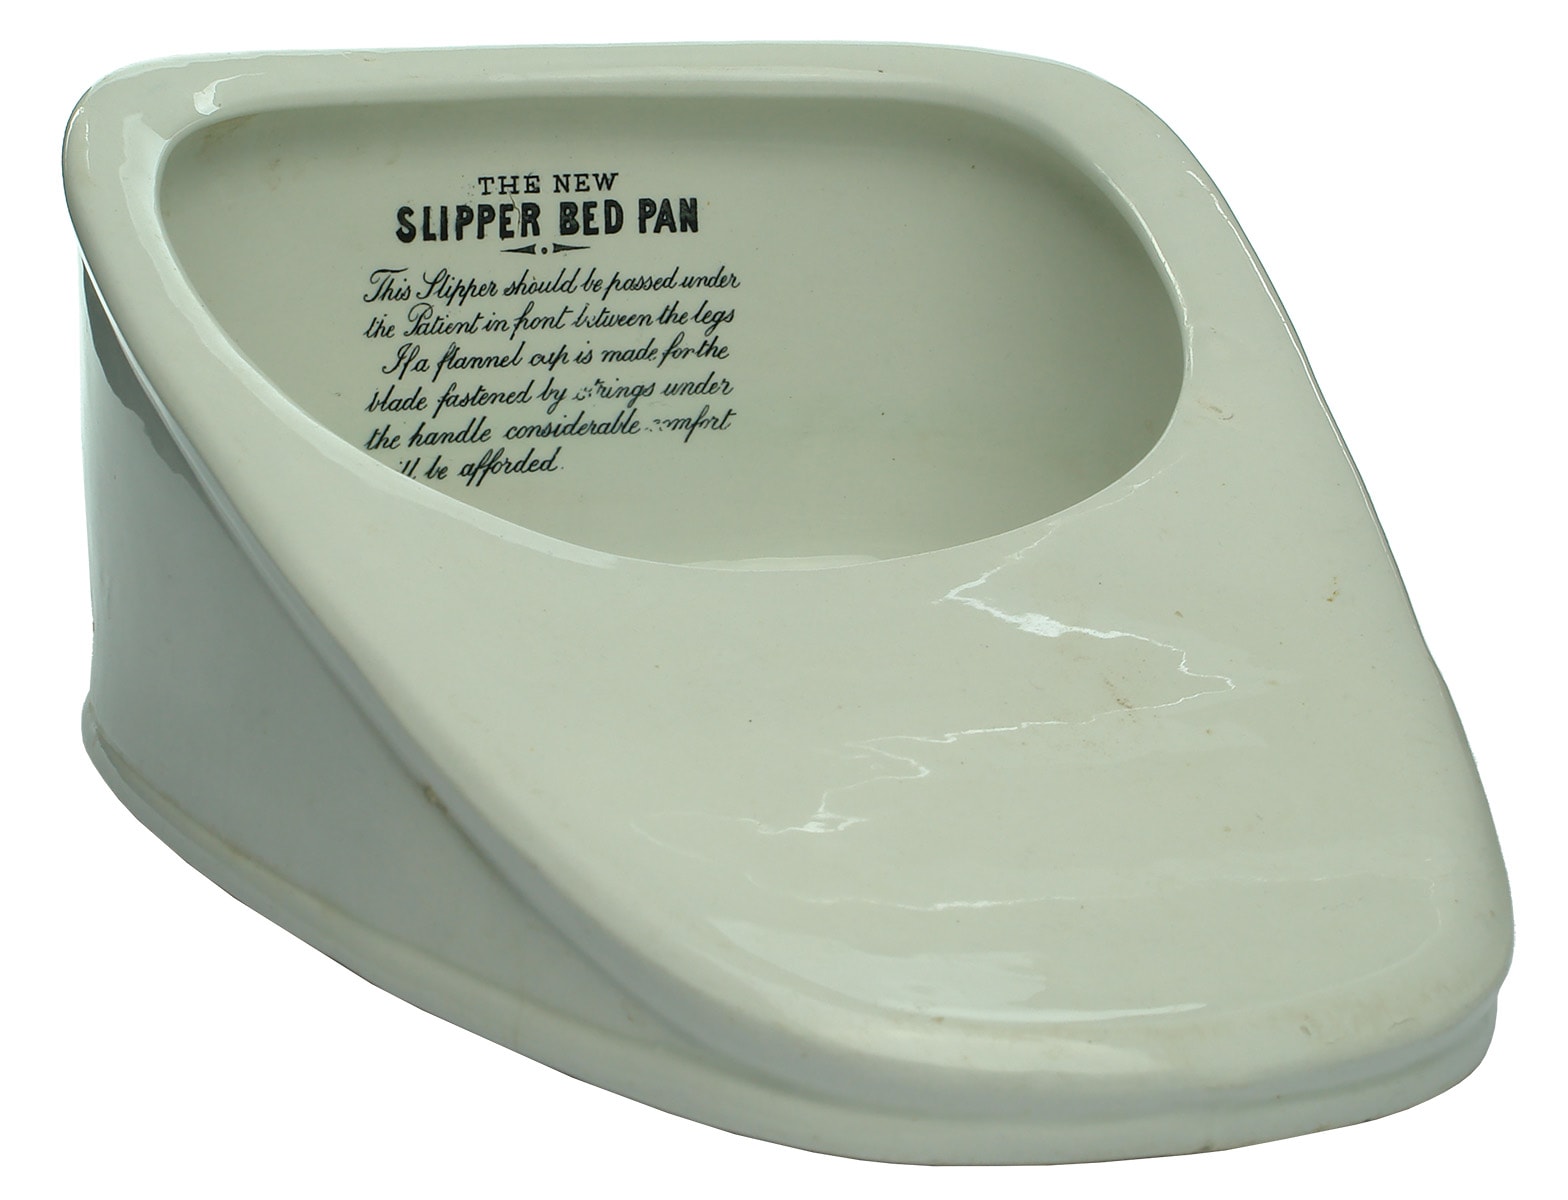 The New Slipper Bed Pan